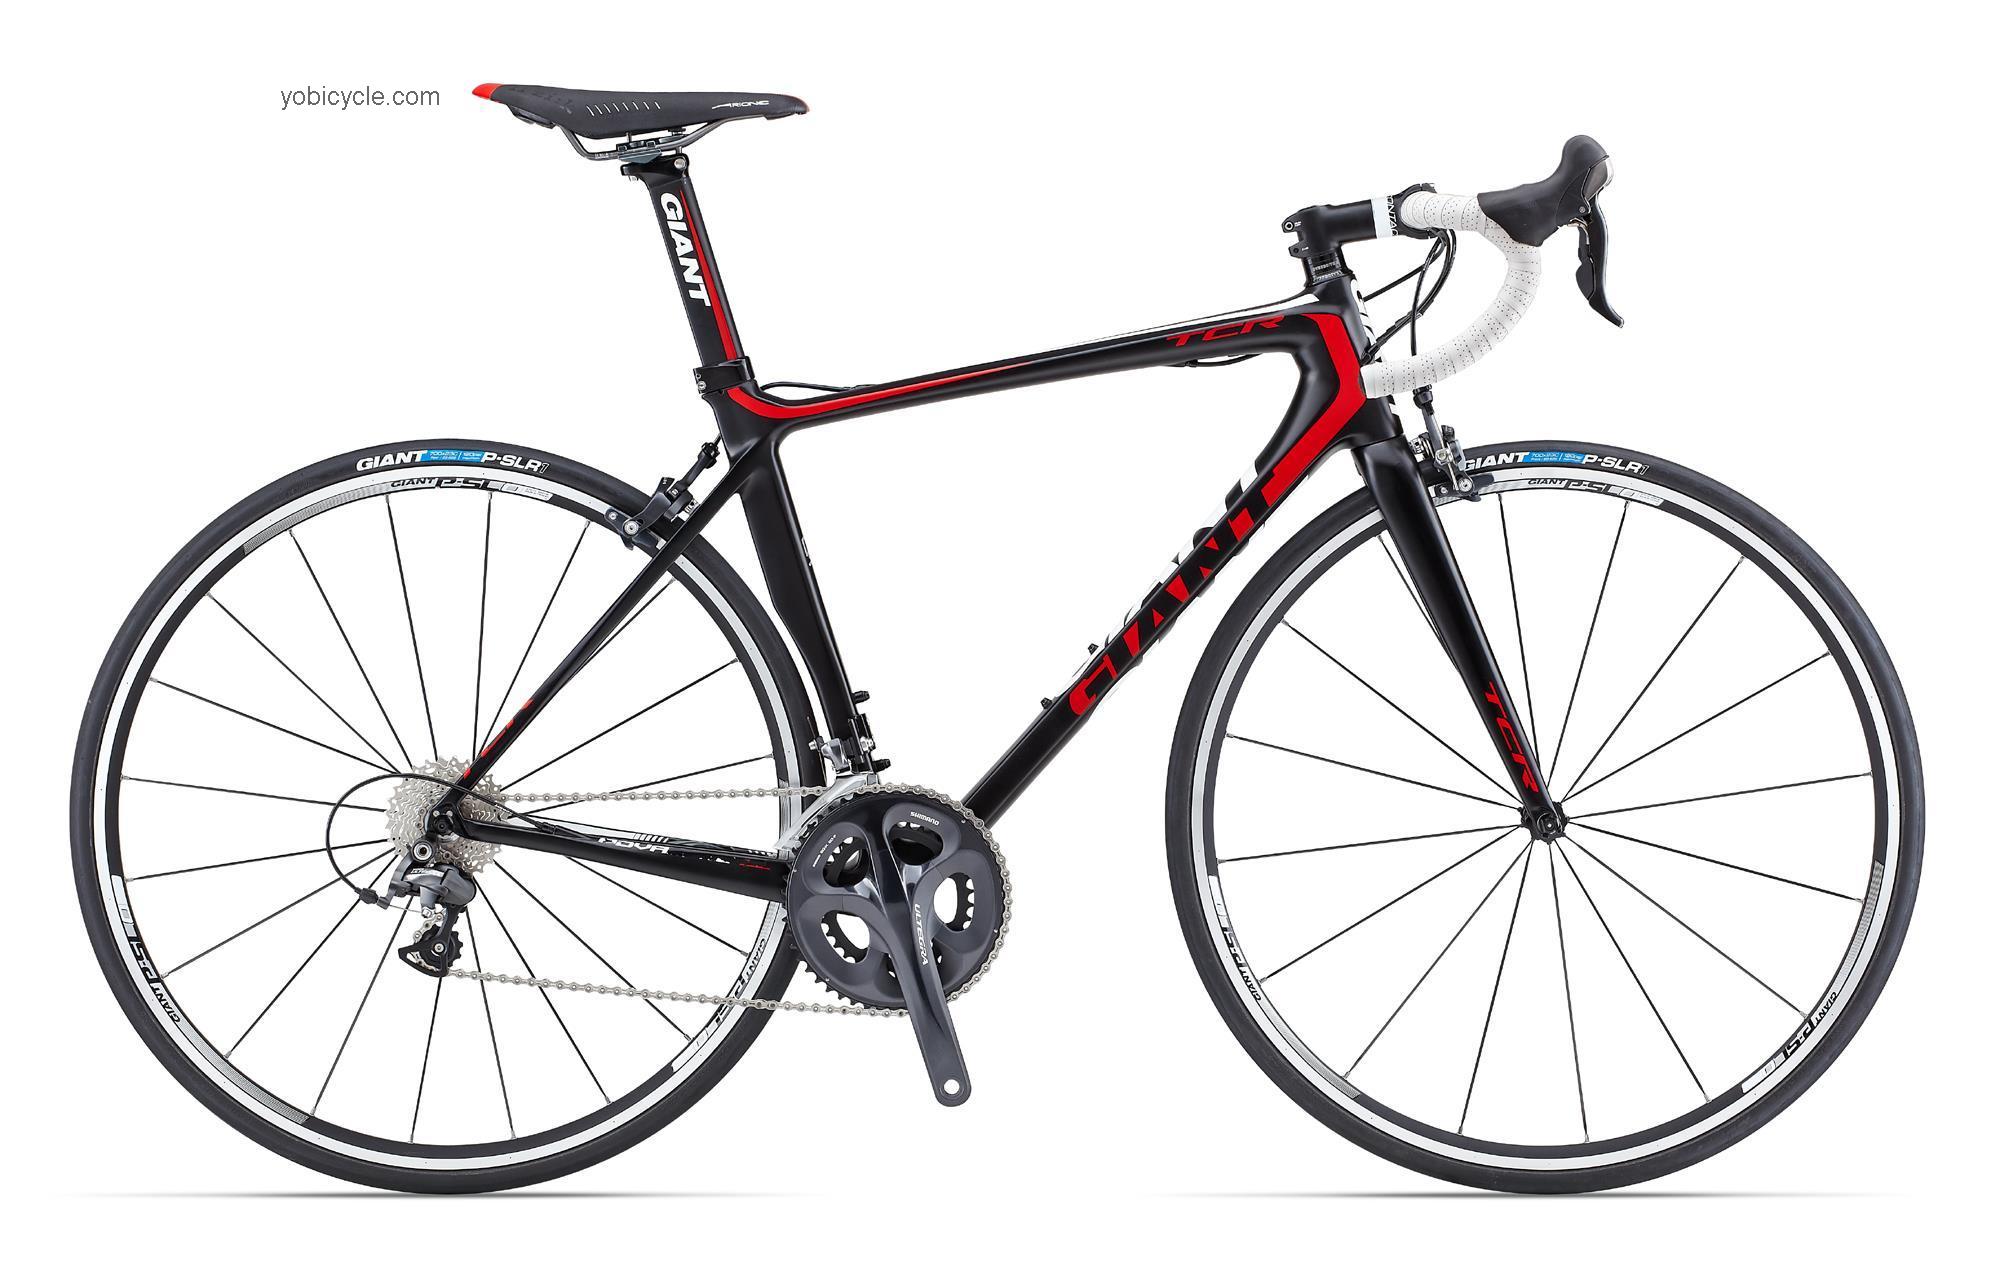 Giant TCR Advanced SL4 2013 comparison online with competitors